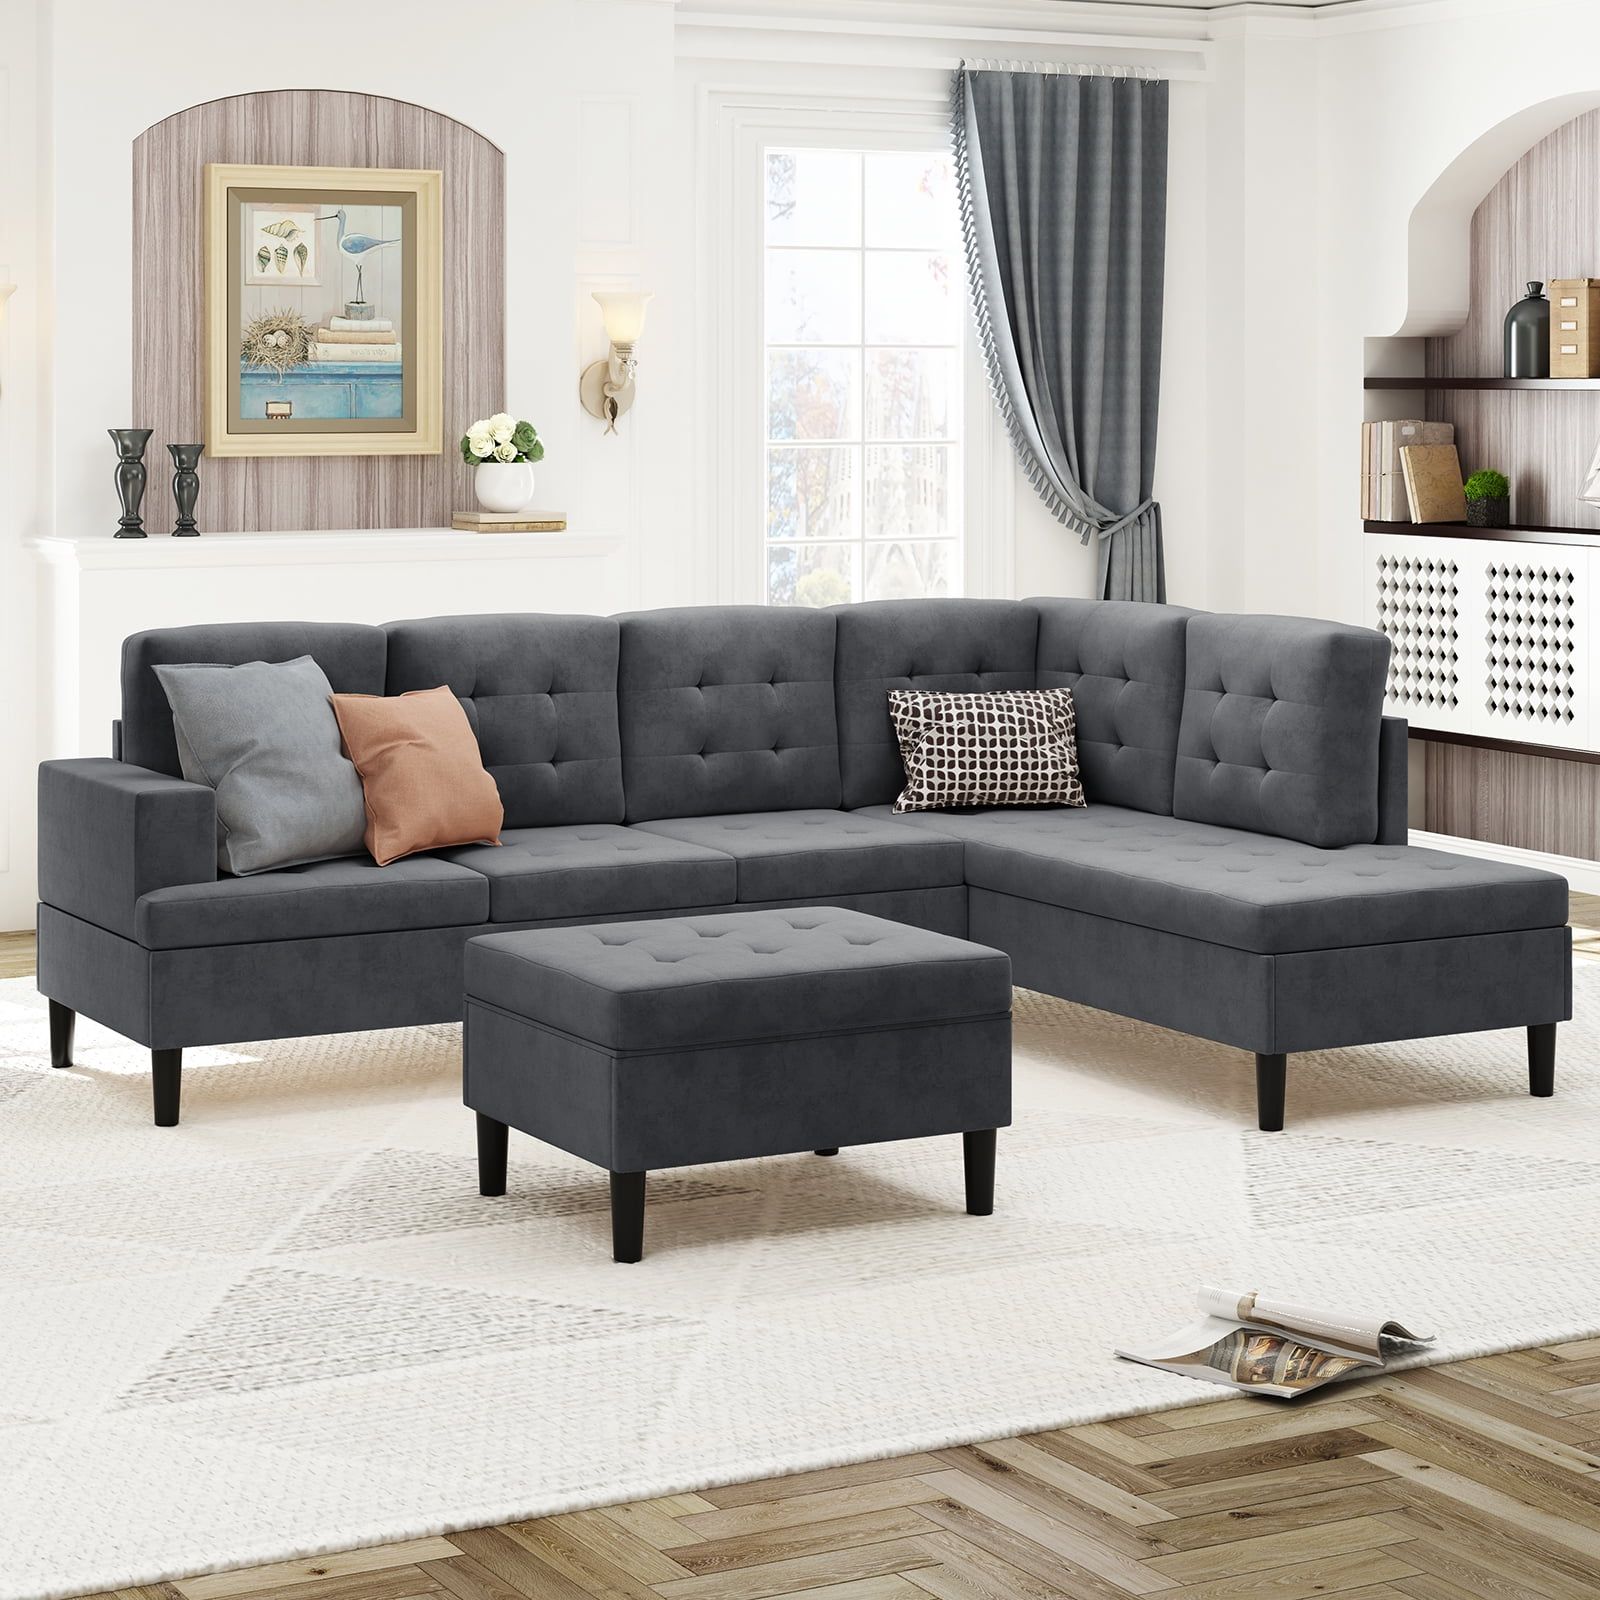 Mjkone Modern Upholstered Tufted L Shape Sofa,Microsuede Fabric Sectional  Sofa Set,Oversized Sectional Sleeper Sofa Couch With Movable Ottoman For  Living Room/Loft/Apartment (Coffee) – Walmart Within Modern L Shaped Sofa Sectionals (Photo 9 of 15)